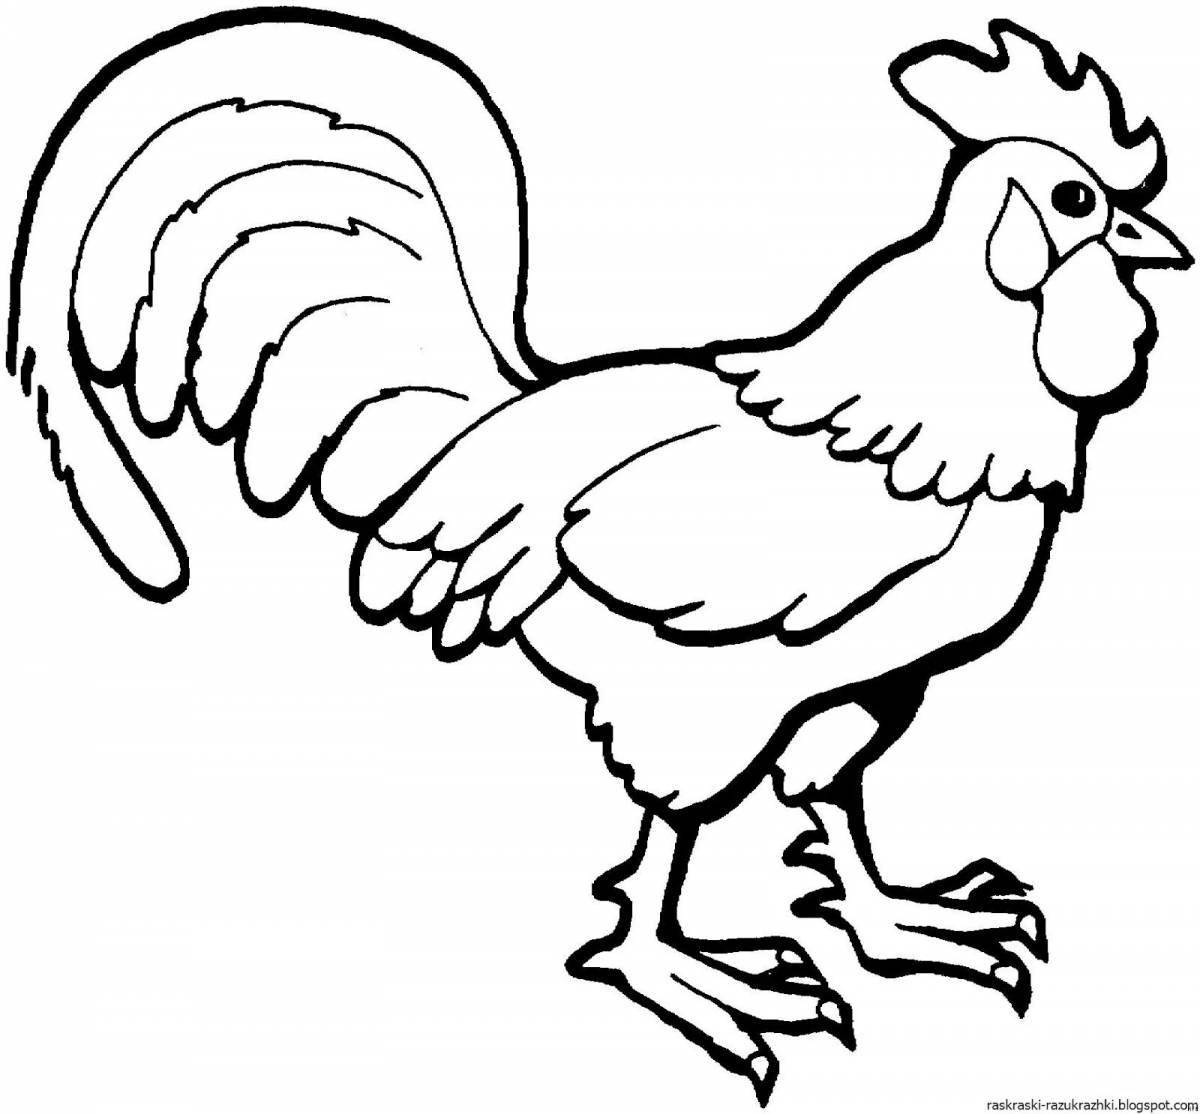 Adorable rooster coloring page for 3-4 year olds